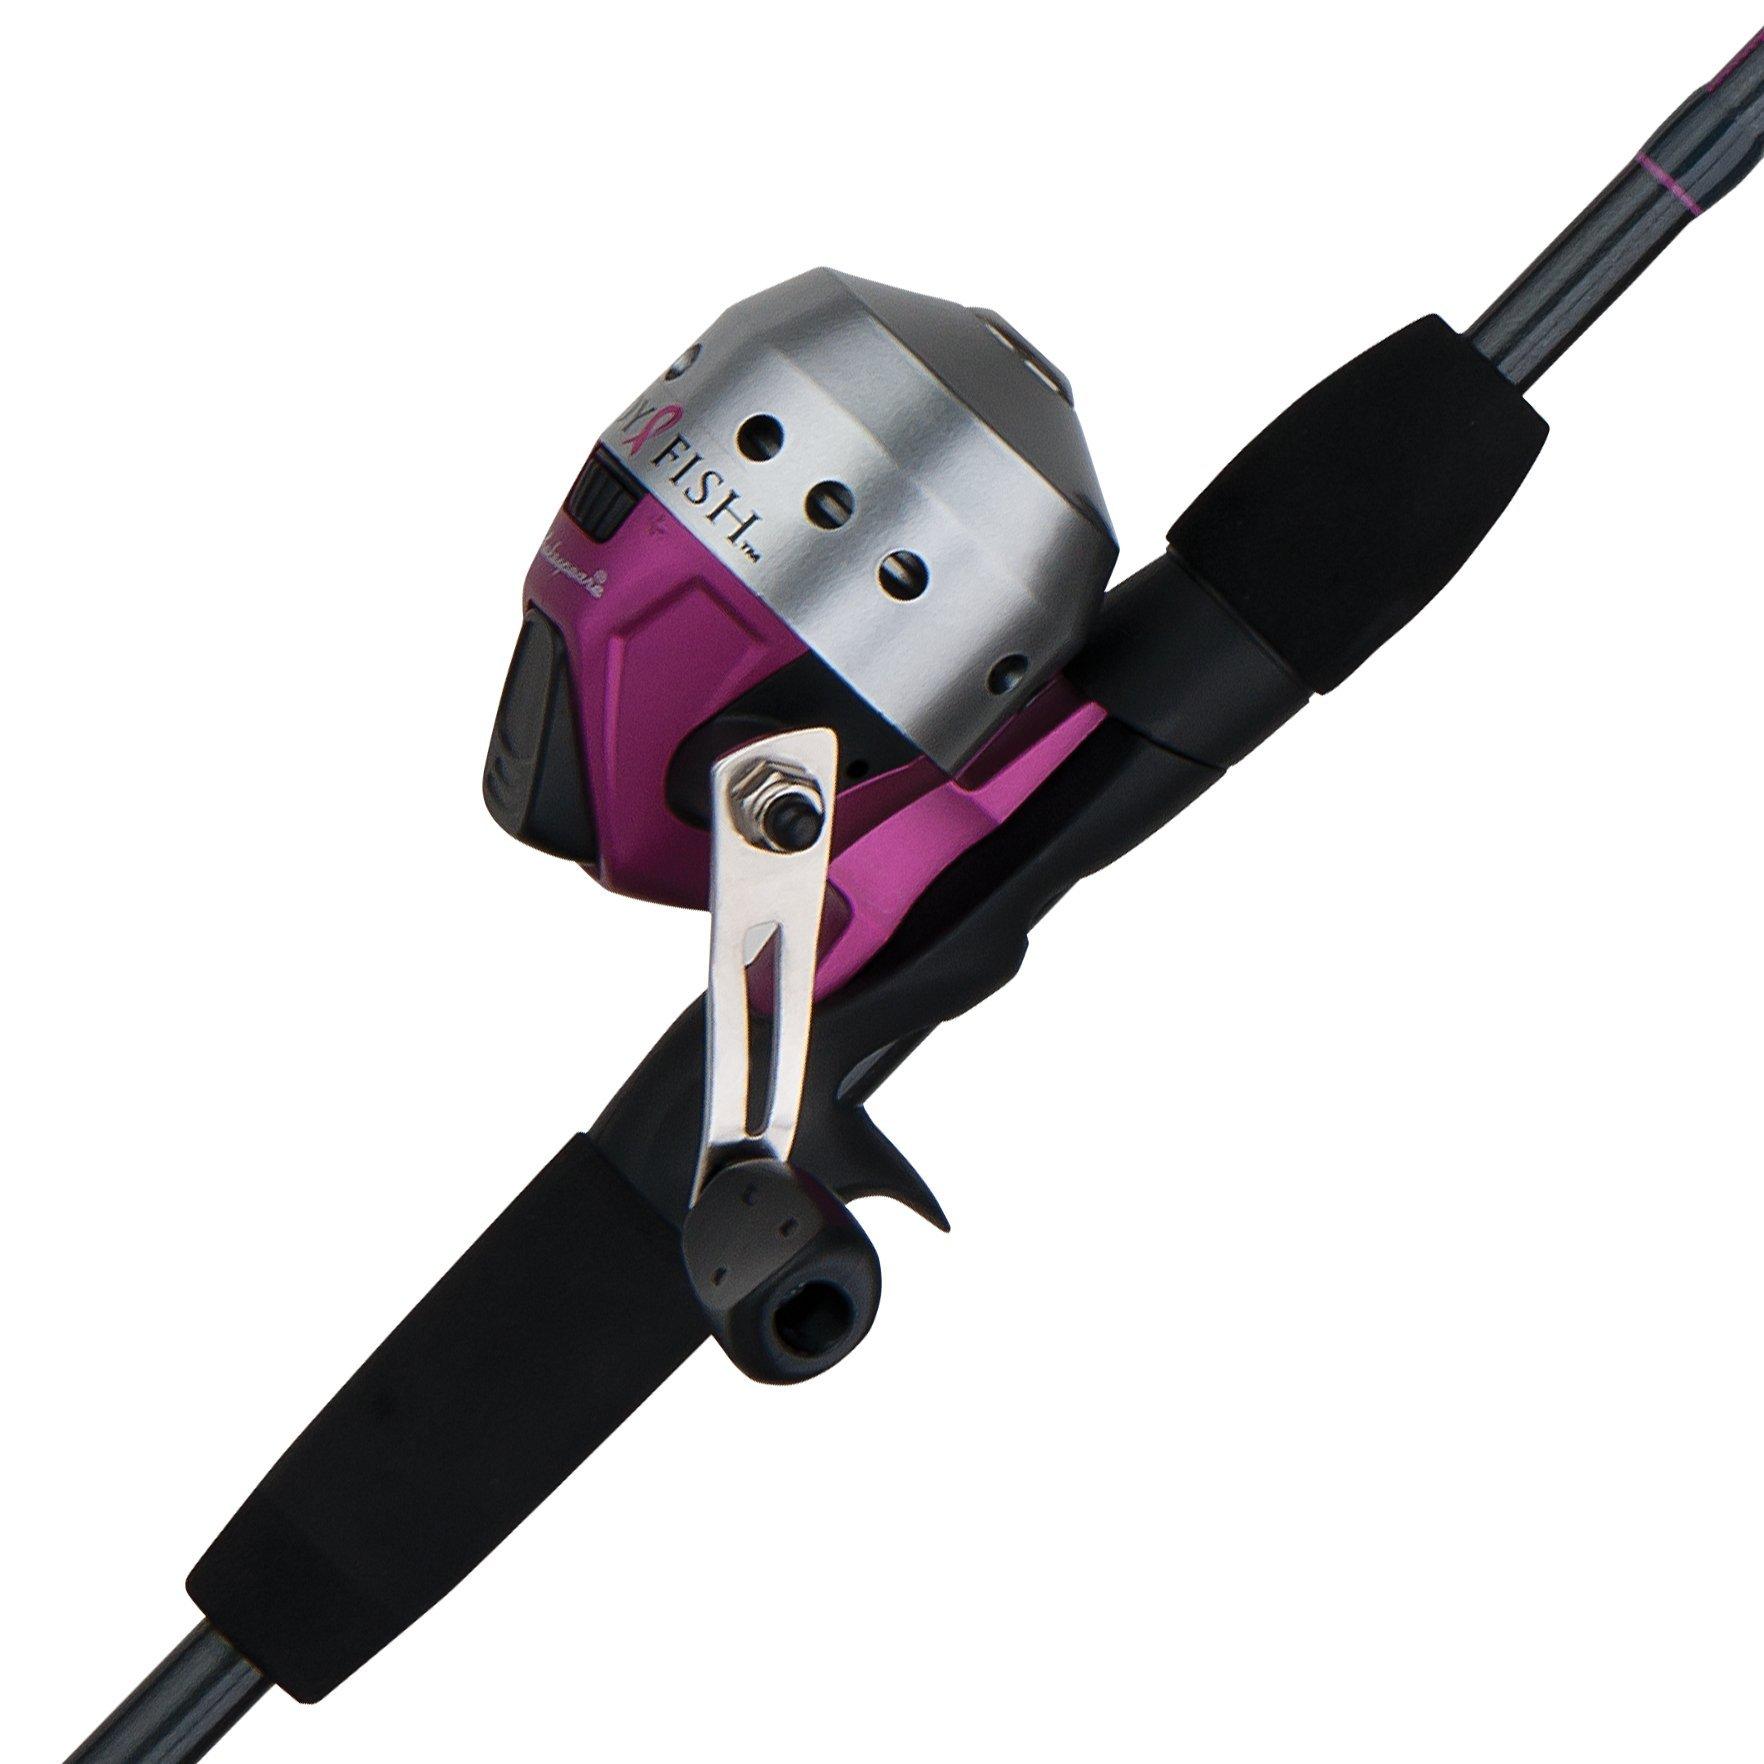 https://op2.0ps.us/original/opplanet-shakespeare-ladyfish-spincast-combo-3-0-1-right-6-5ft-6in-rod-length-medium-power-2-pieces-rod-pink-ladysc56m6-main